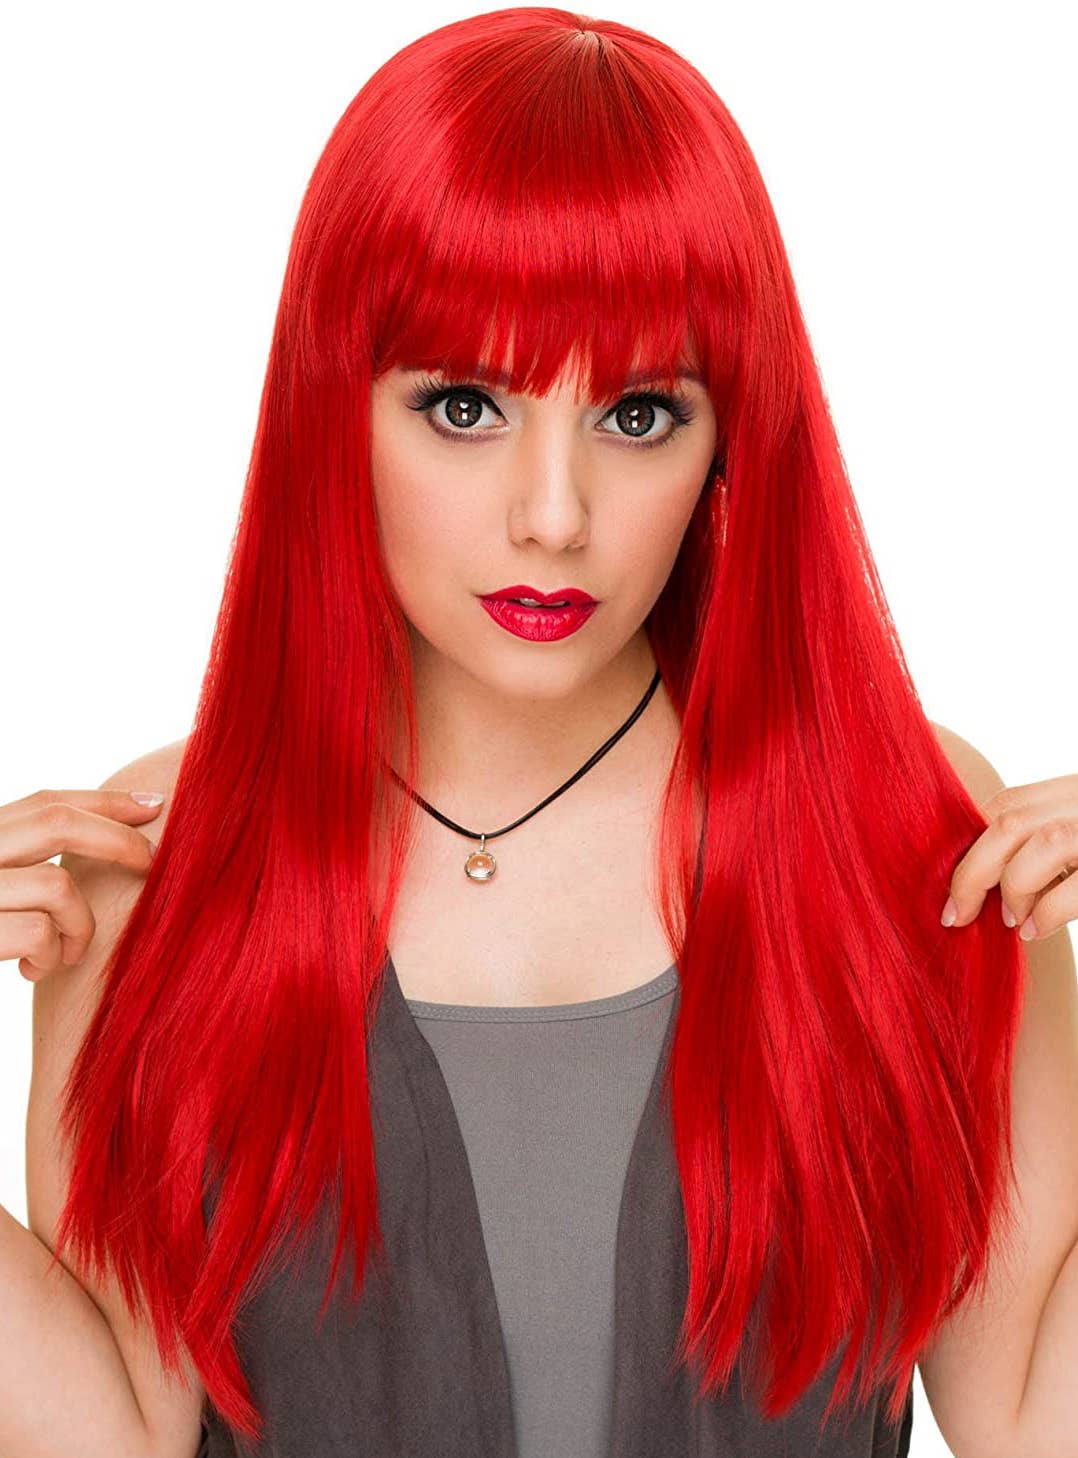 Bright Red Women's Deluxe Heat Resistant Straight Wig with Bangs Front Image